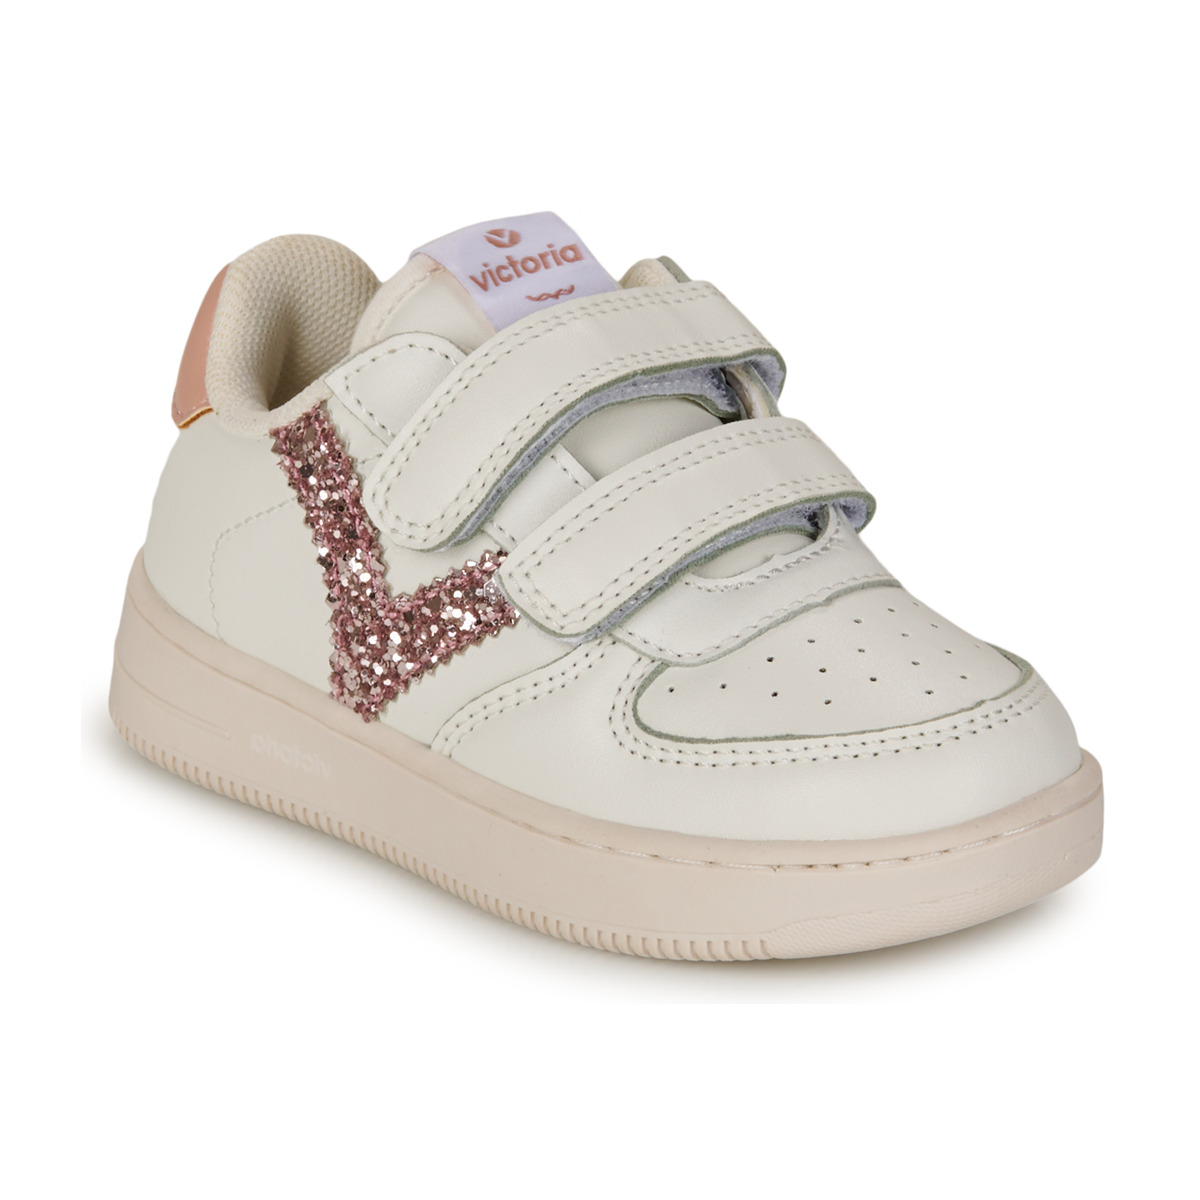 Chaussures Fille Baskets basses Victoria SIEMPRE Blanc / Rose